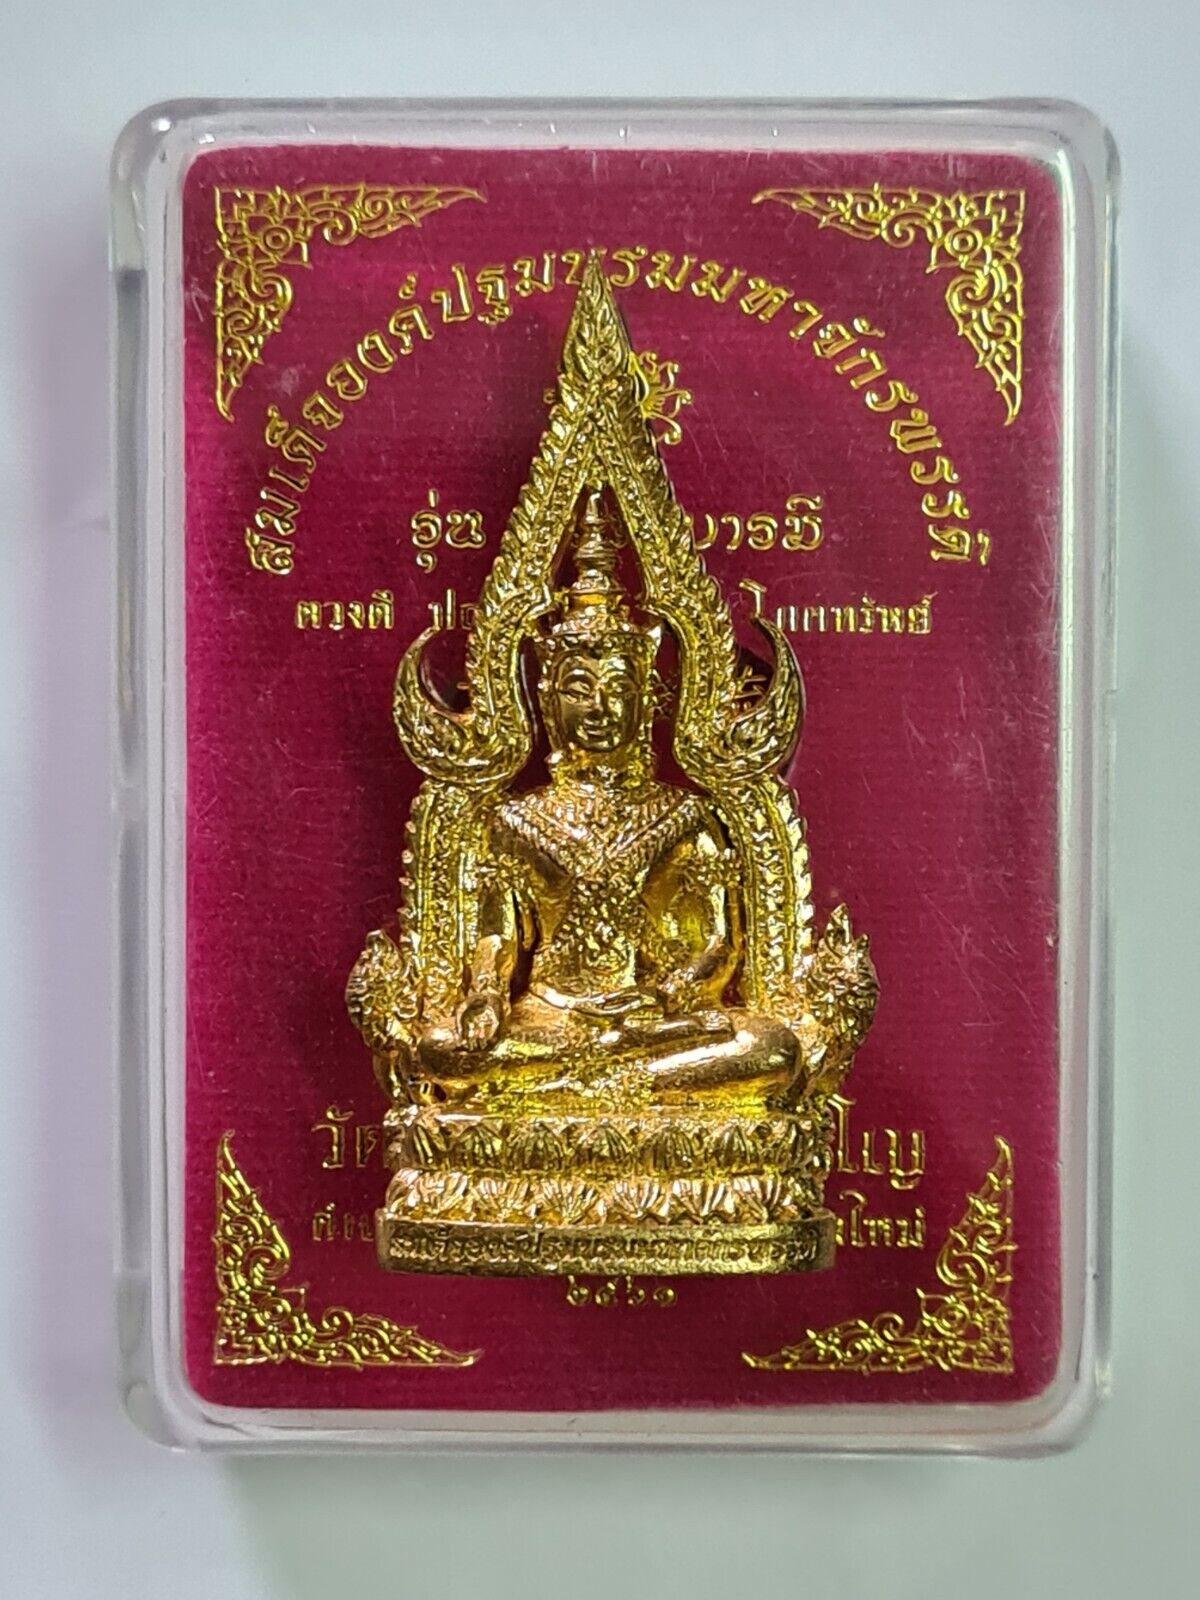 Amulet, Emerald Buddha, Emperor, Gold Mix Metal , Powerlul, Every thing Success.